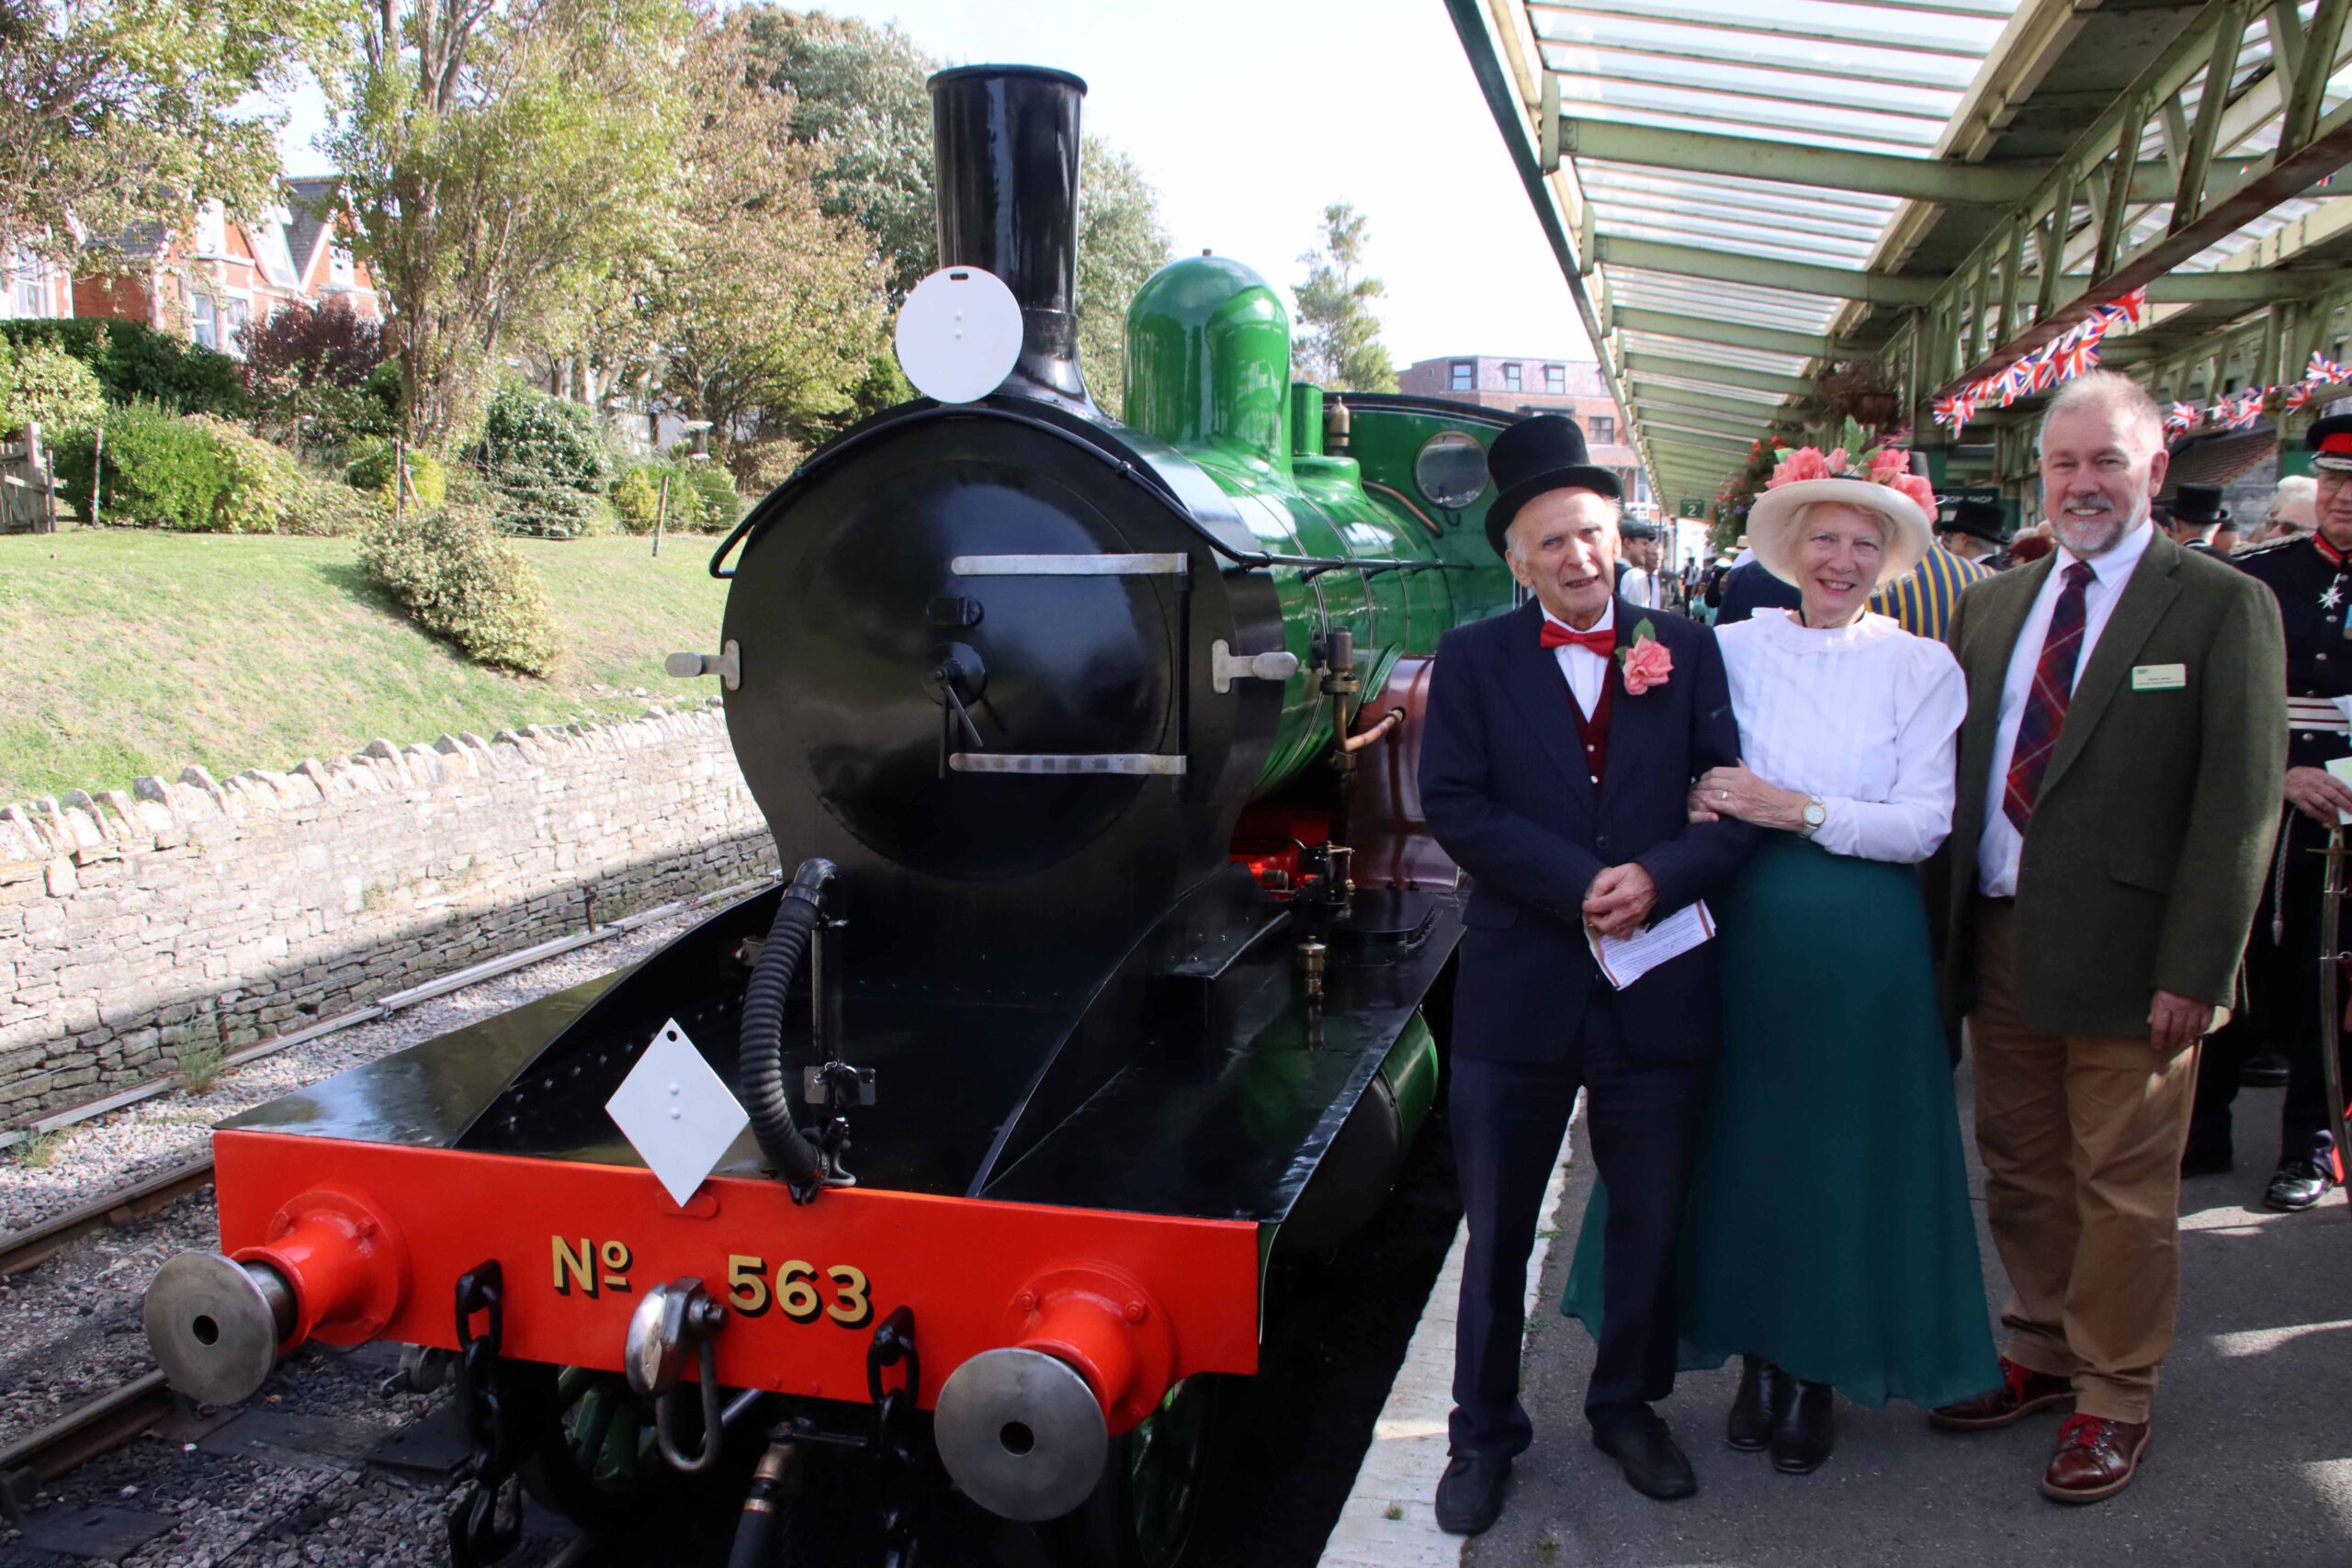 Robert Adams, a descendant of the T3’s Victorian designer William Adams, and Margaret Adams, and Swanage Railway Trust chairman Gavin Johns | Credit: Andre PM Wright